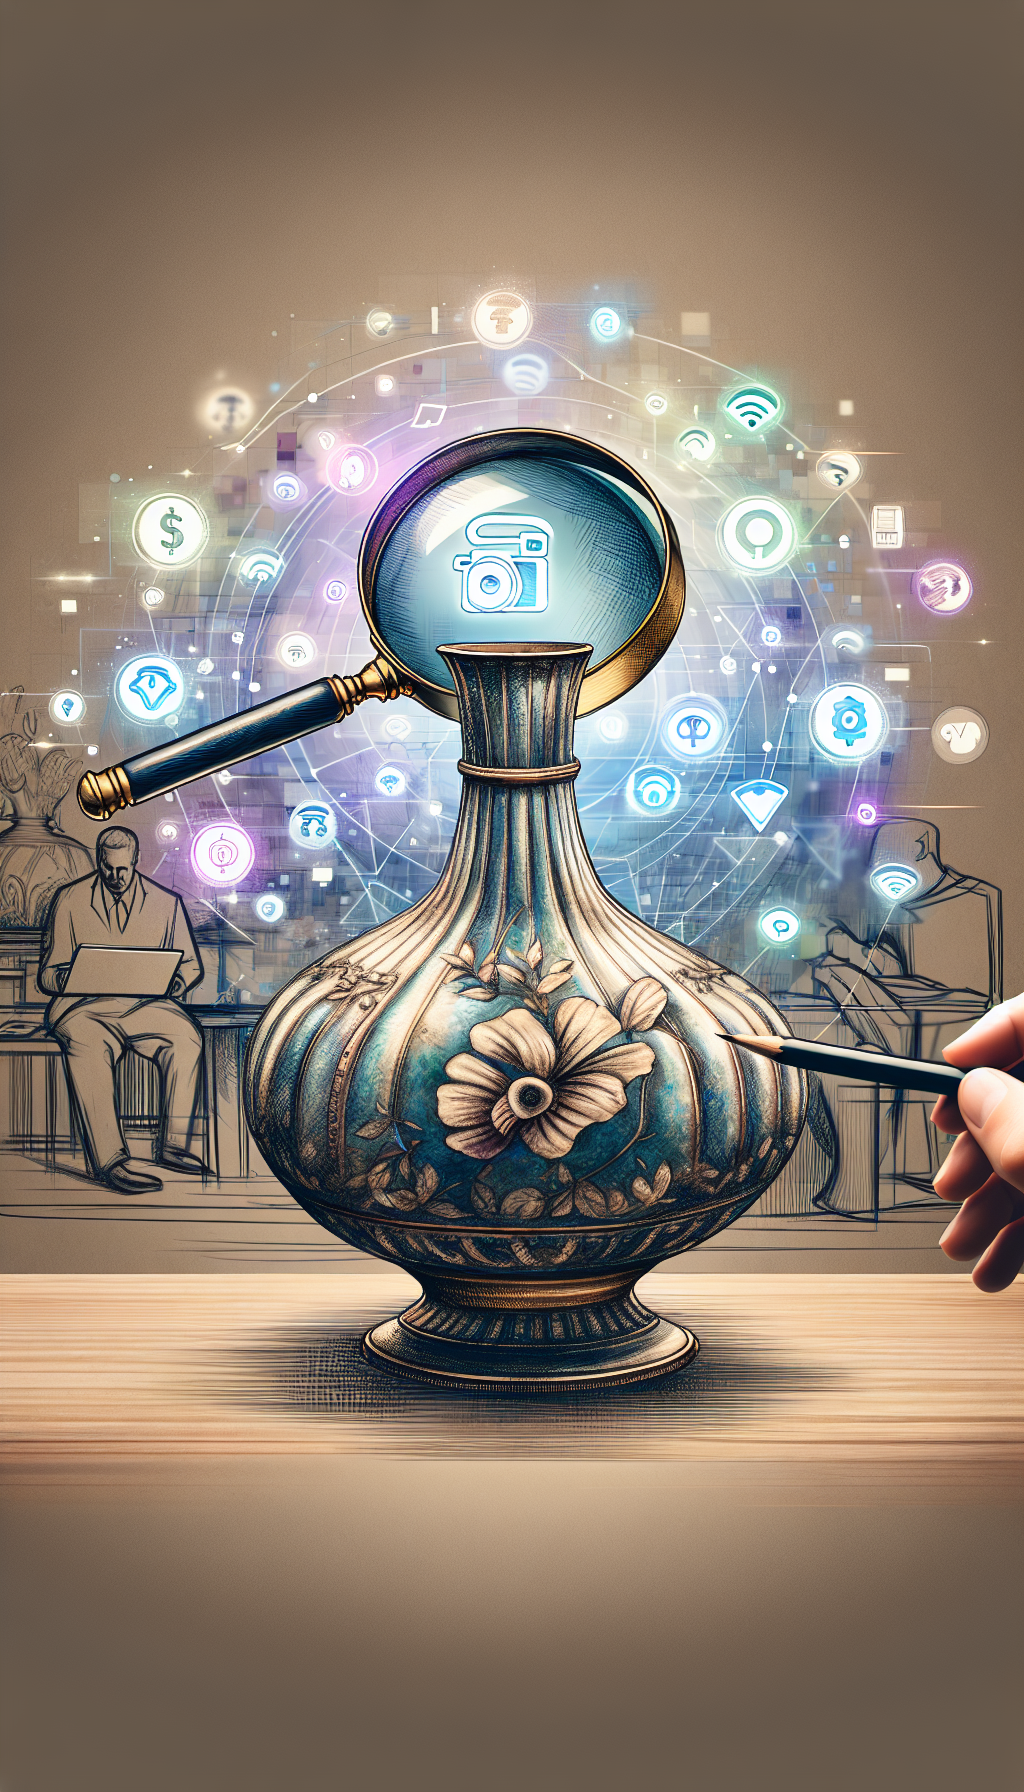 An illustration depicts a pristine vintage magnifying glass hovering over an ornate antique vase, with digital icons like a camera, Wi-Fi signal, and currency symbols swirling around. A faint silhouette of a person consulting their computer in the background subtly suggests a live virtual appraisal taking place, underscoring the theme of free online antique evaluations.